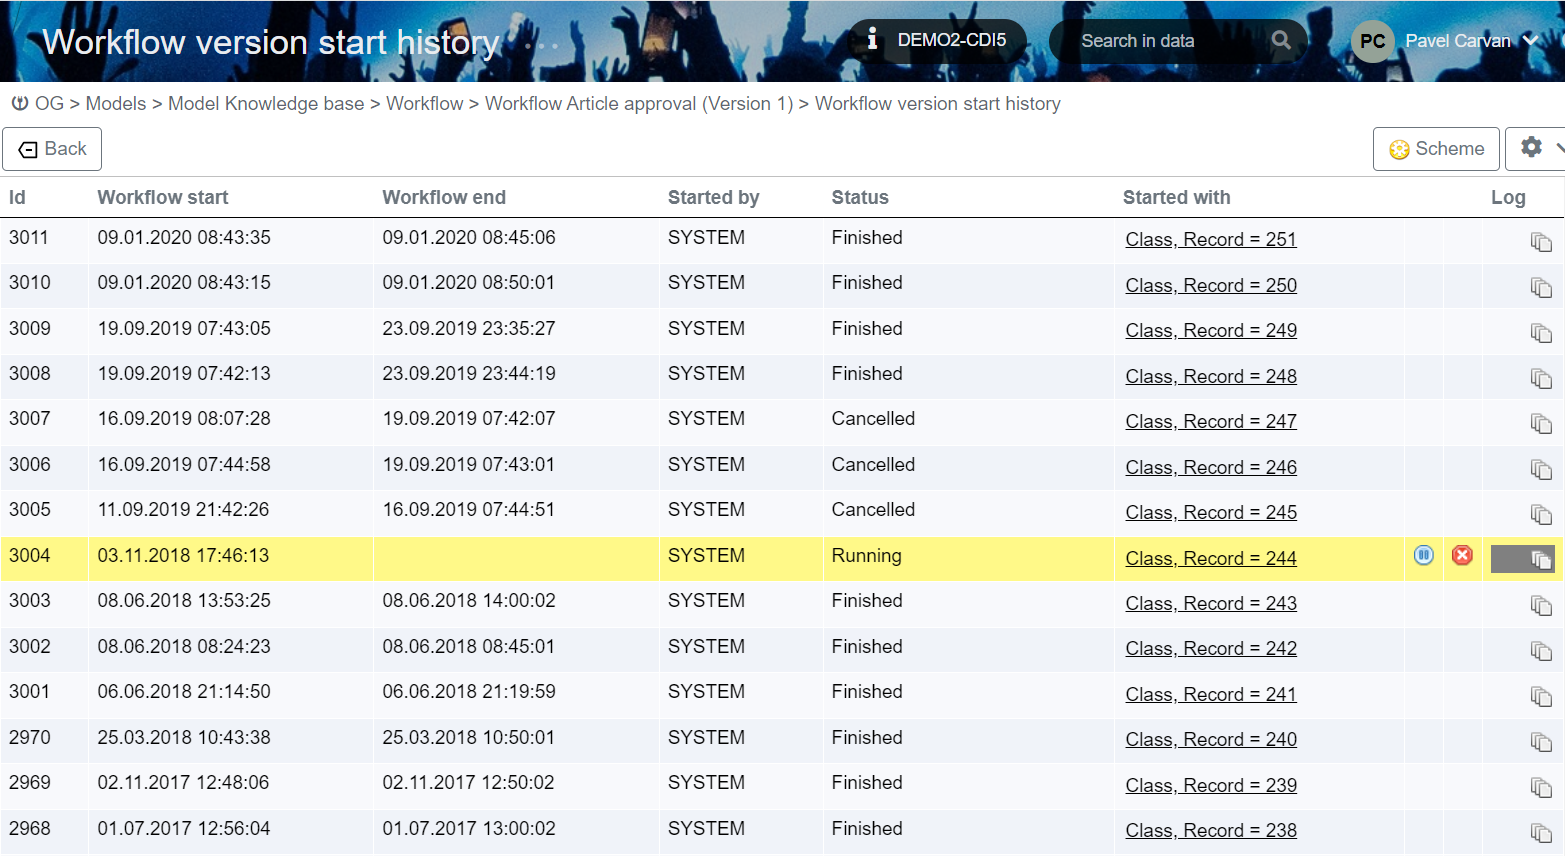 The workflow execution log displays all individual calls of the given process and their statuses.